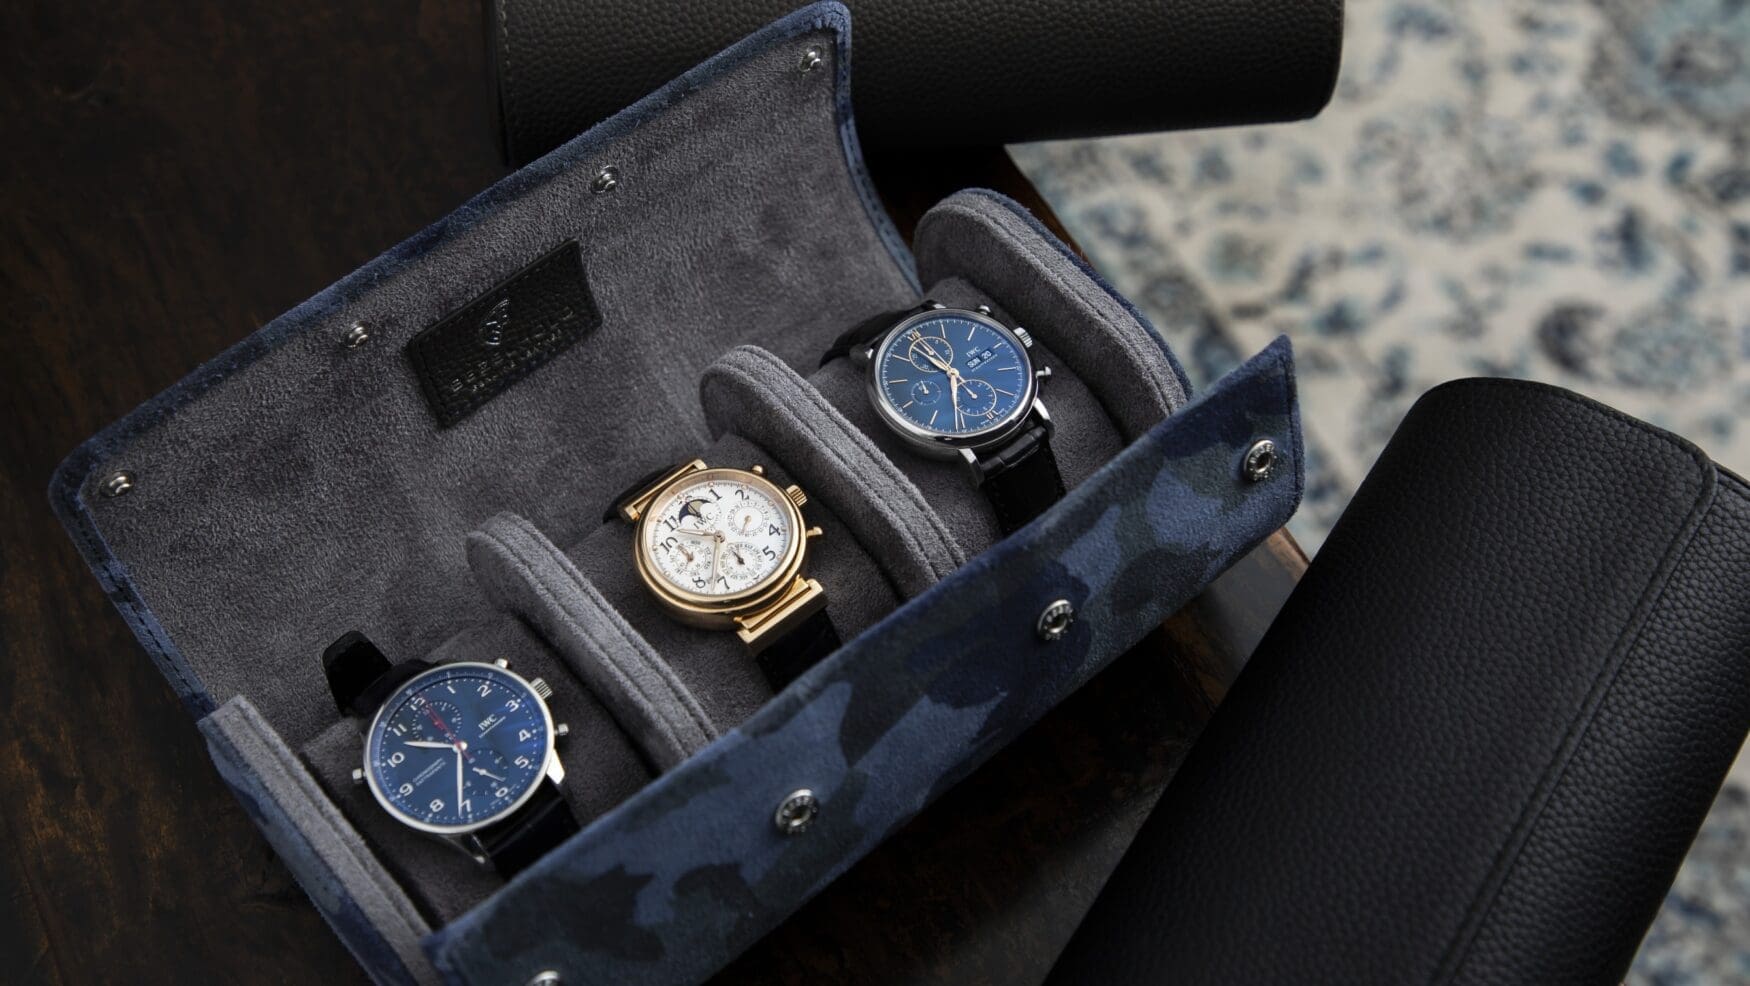 BezelHold’s Hat-Trick Marine Camouflage is an antidote to boring (and subpar) watch rolls